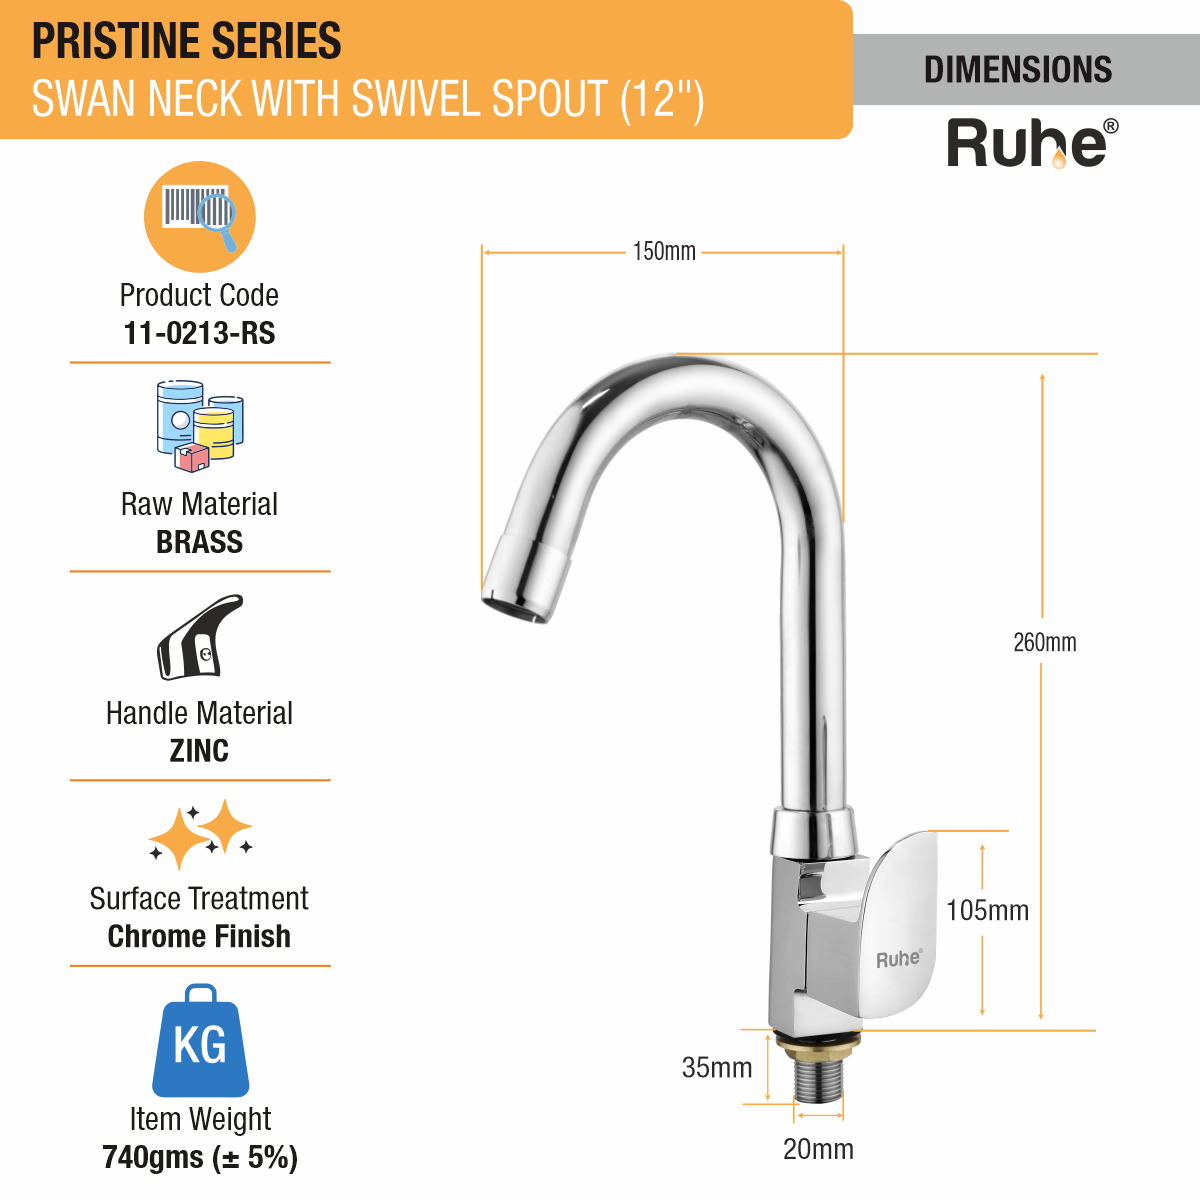 Pristine Swan Neck with Small (12 inches) Round Swivel Spout Brass Faucet dimensions and size